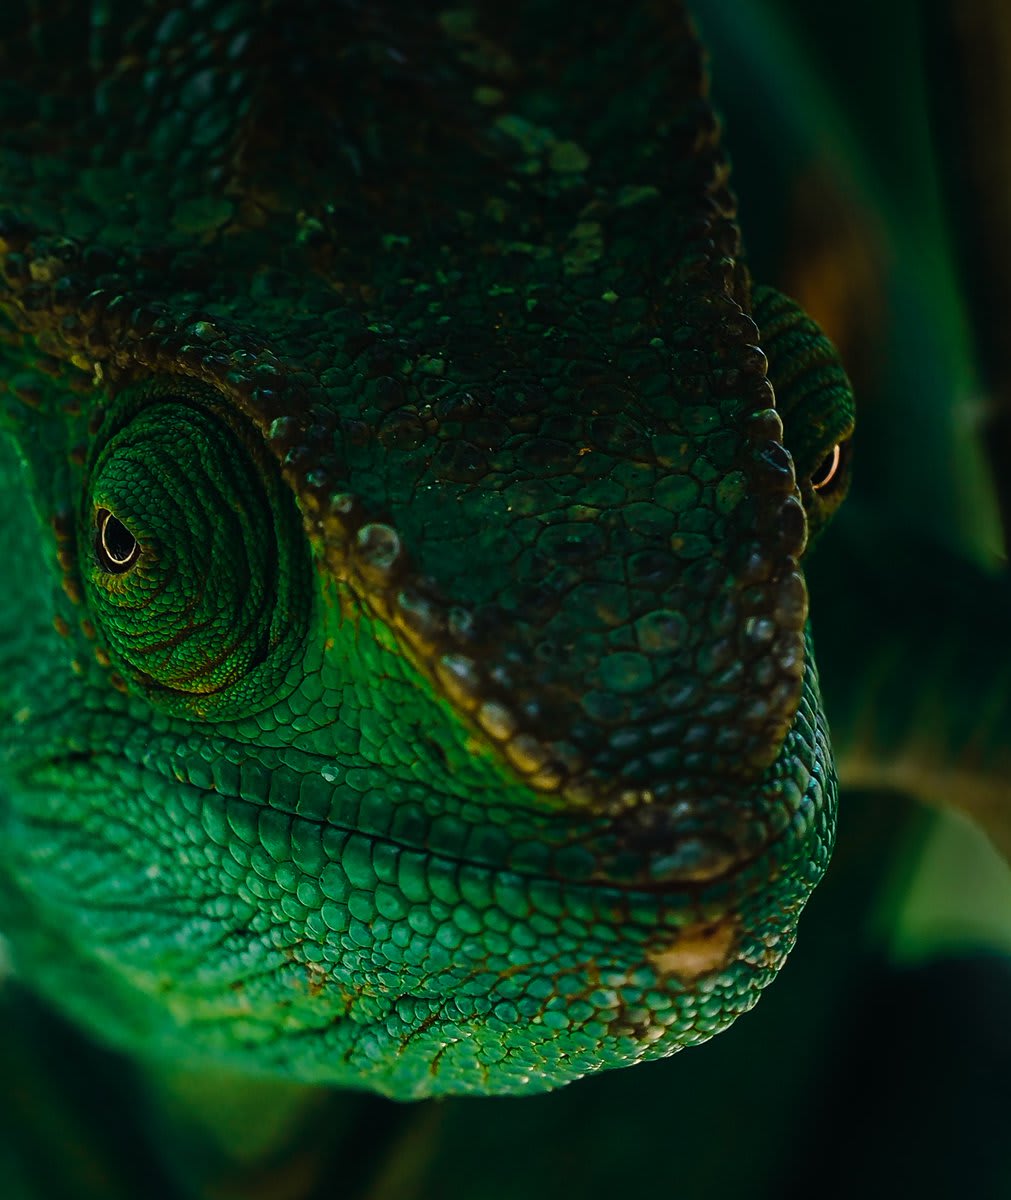 Stunning portraits of Madagascar’s reptiles and amphibians by Ben Simon Rehn